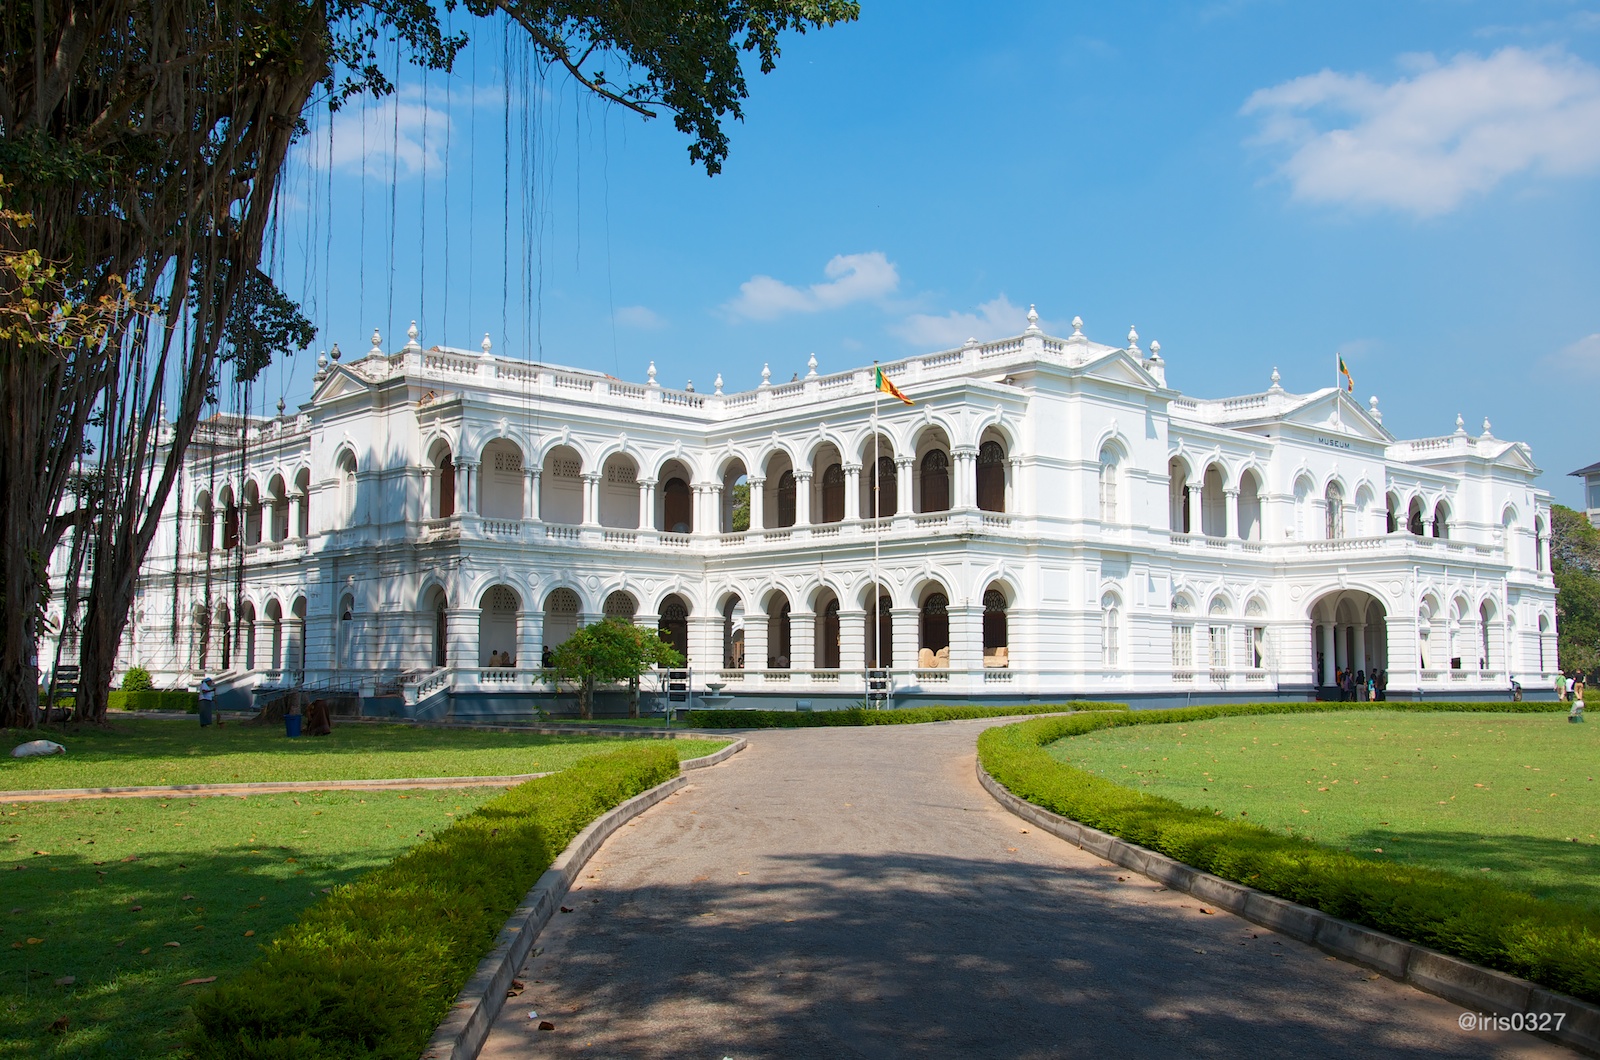 Travel Guide to Colombo, Sri Lanka [with Sample Itinerary]